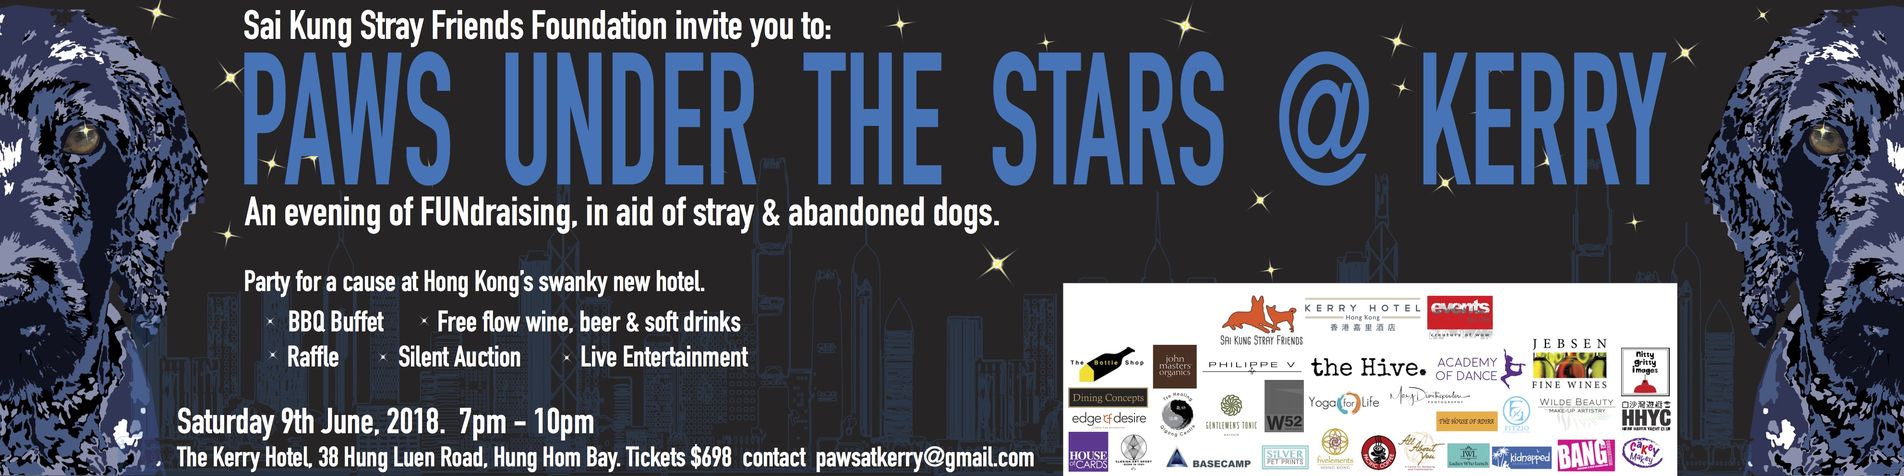 Paws Under the Stars @ Kerry (Sai Kung Stray Friends Foundation)